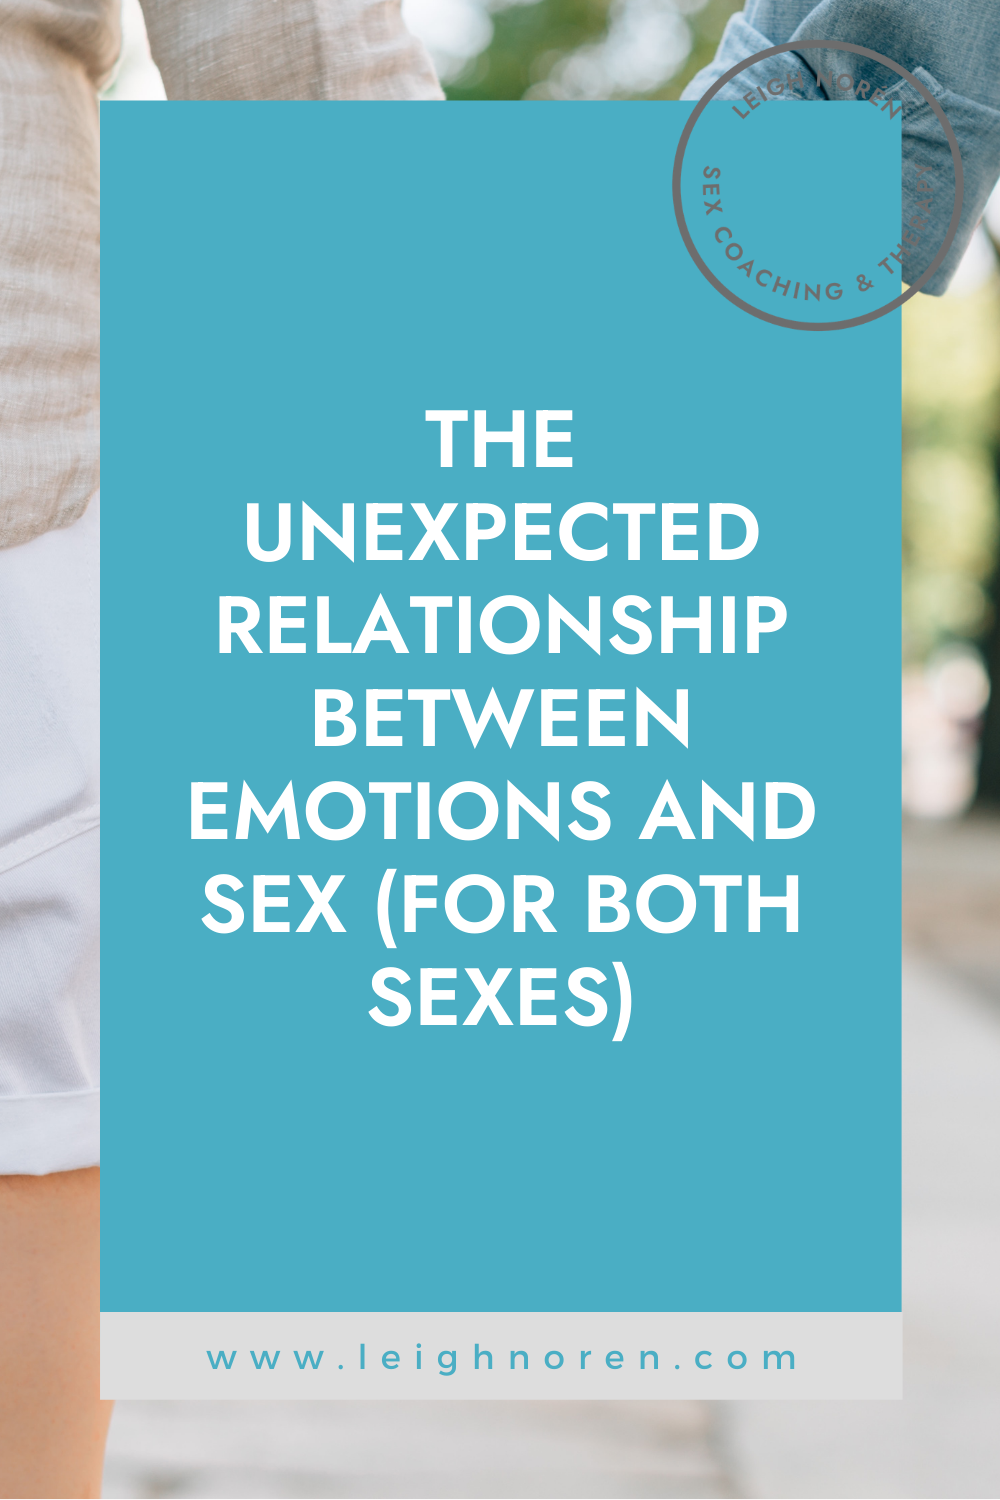 The Unexpected Relationship Between Emotions And Sex (For Both Sexes)